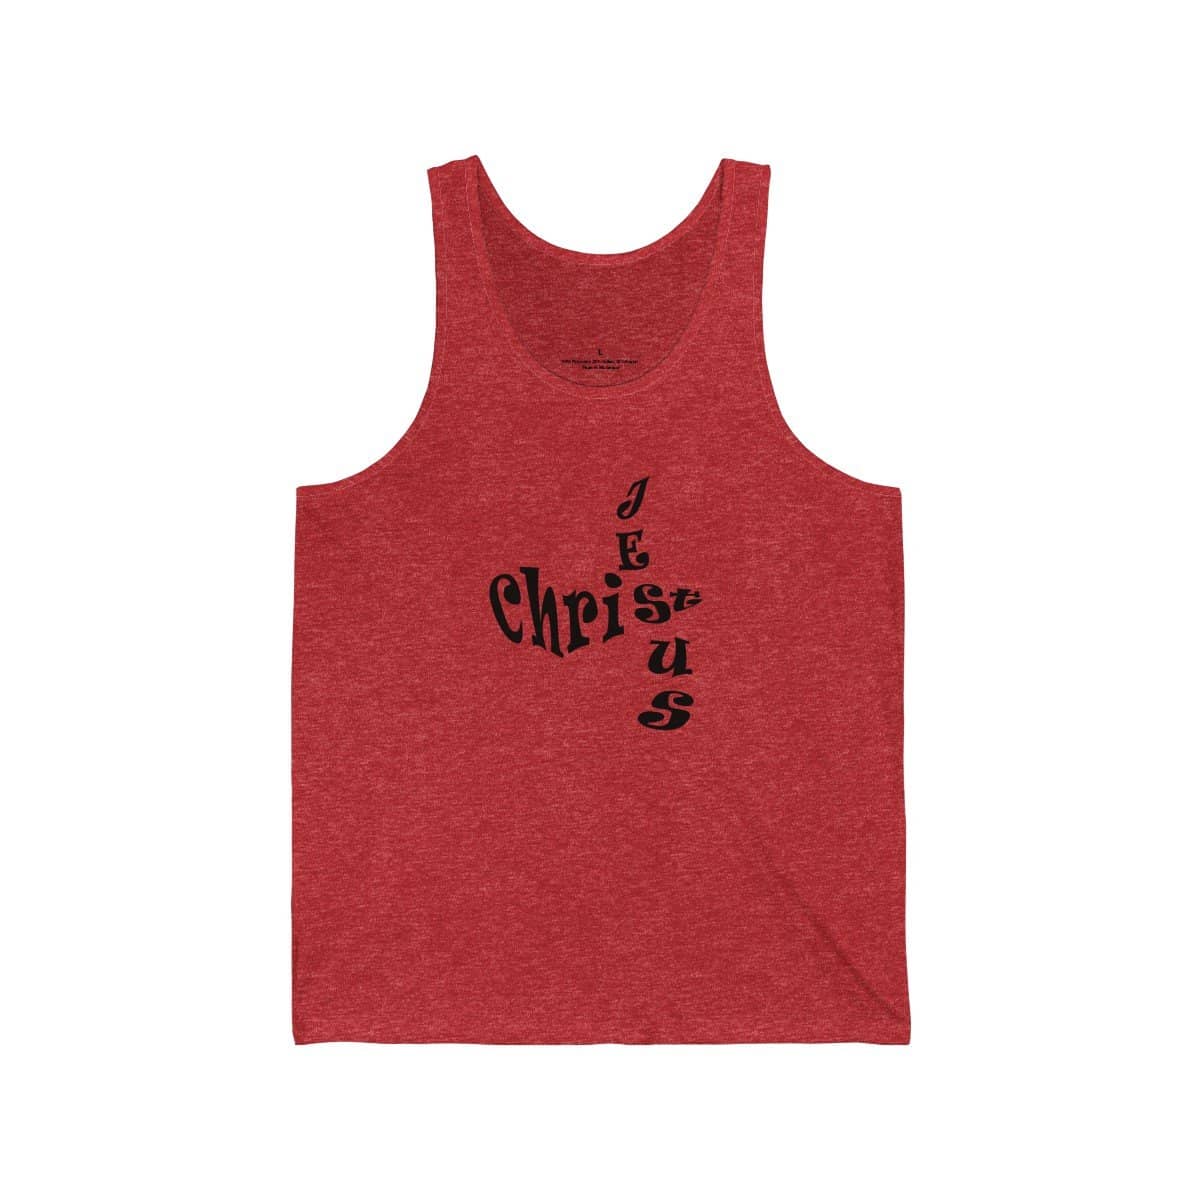 Bella &amp; Canvas 3480 Jersey Tank &quot;Jesus Christ&quot; in 17 Colors and 6 Sizes (3556781949028)